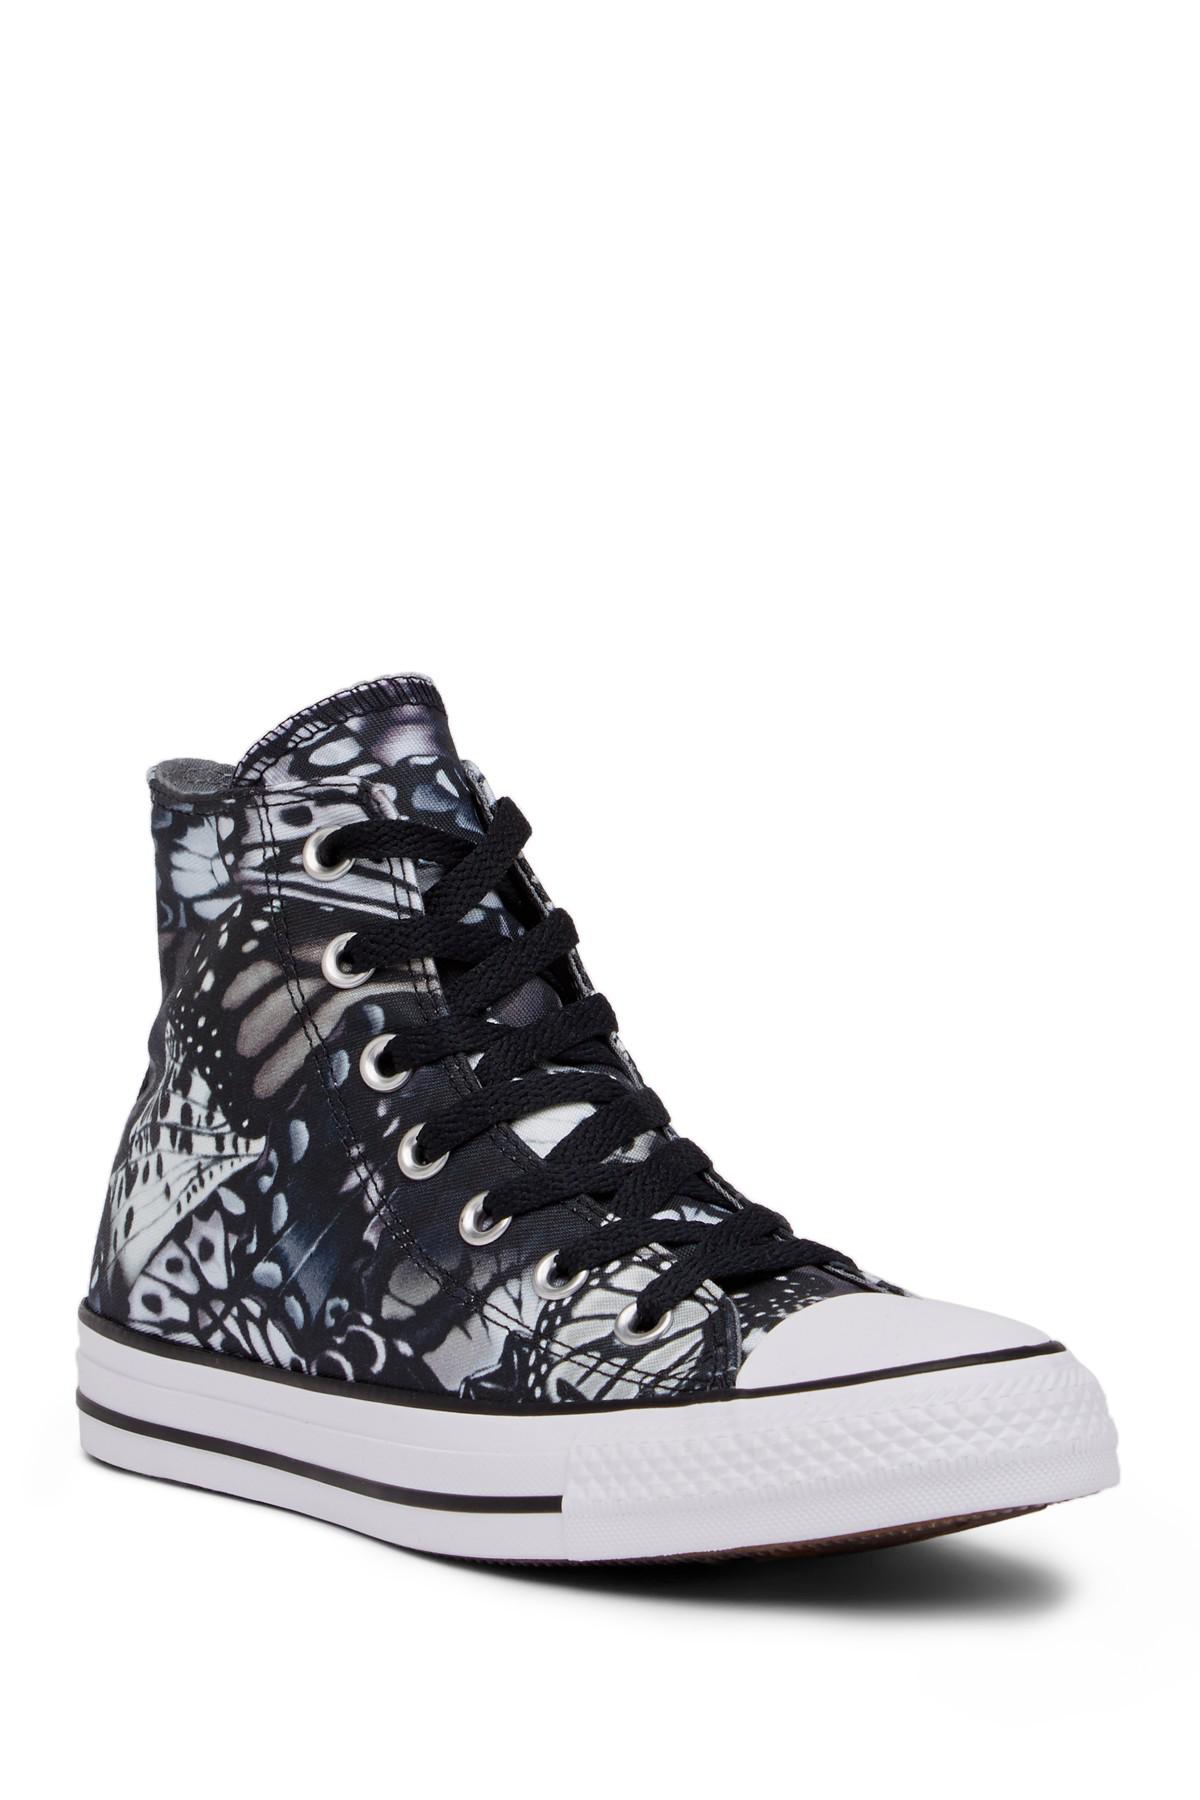 Converse Canvas Chuck Taylor All Star High Top Butterfly Graphic Sneaker in  Black - Lyst